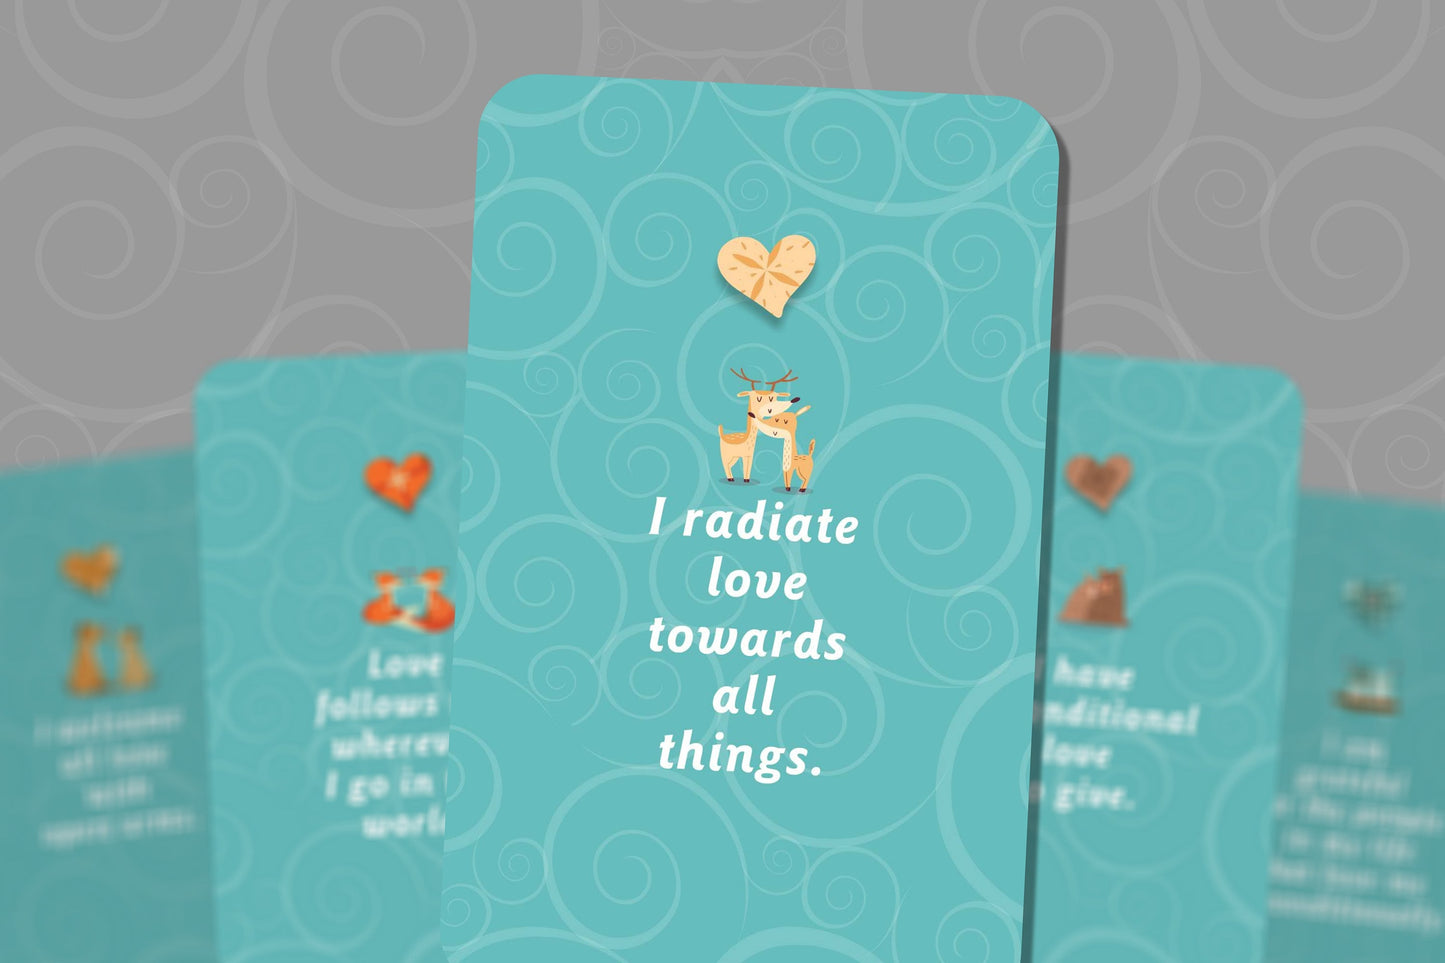 Manifesting Love - Affirmation Cards To attract Love